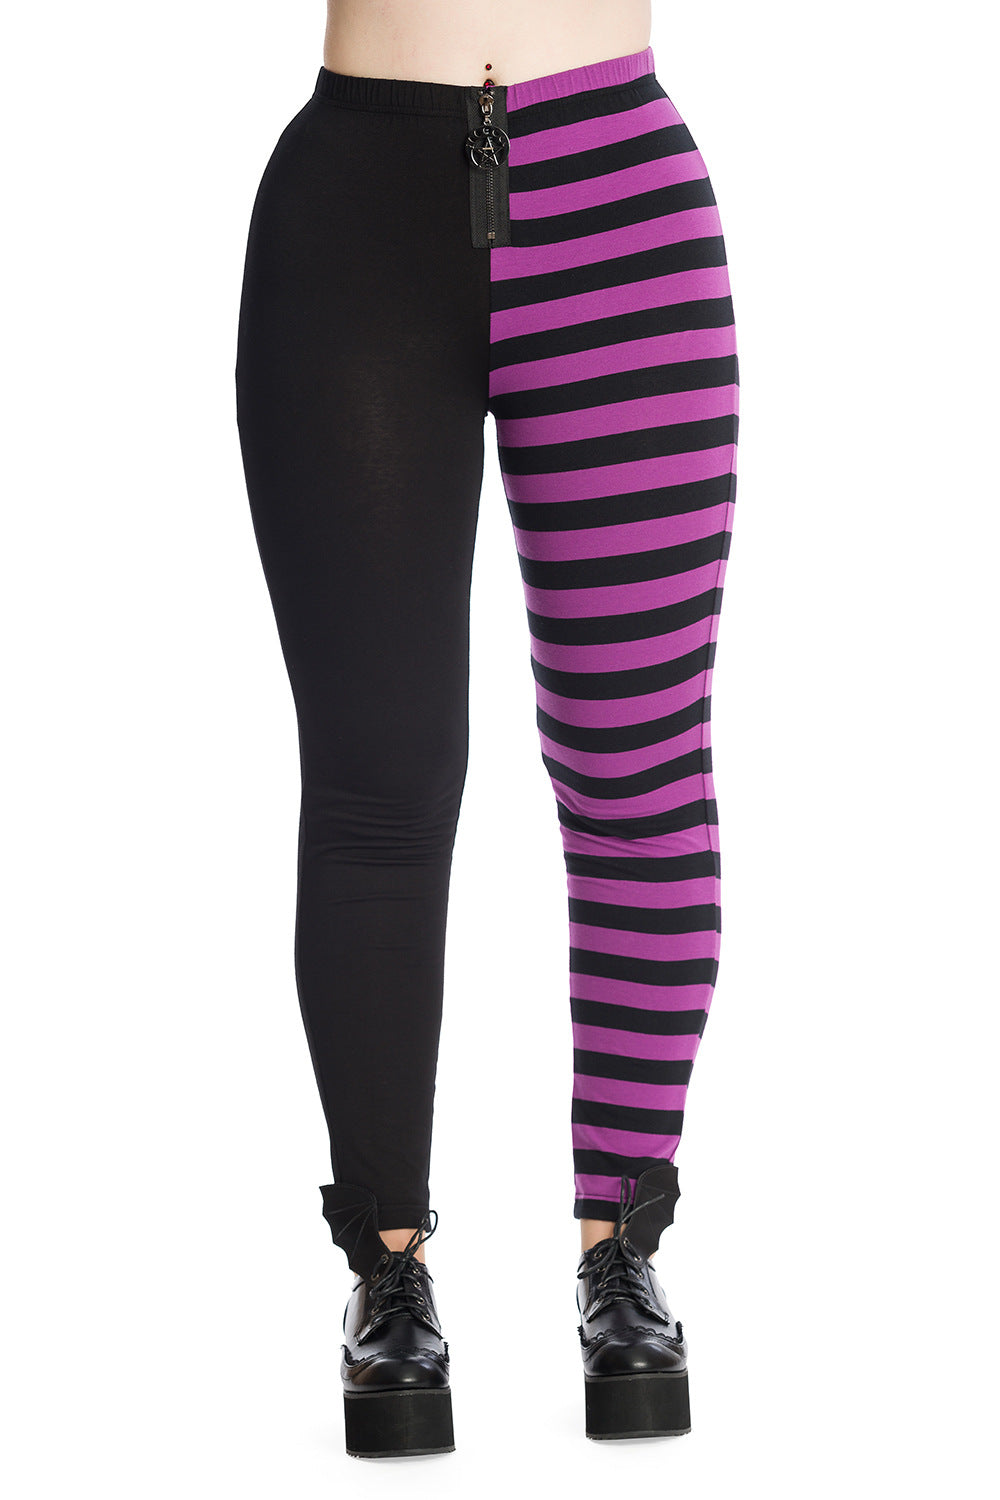 Half Goth Black Half Pastel Pink Spliced Two Tone Leggings for Sale by  itsteeze